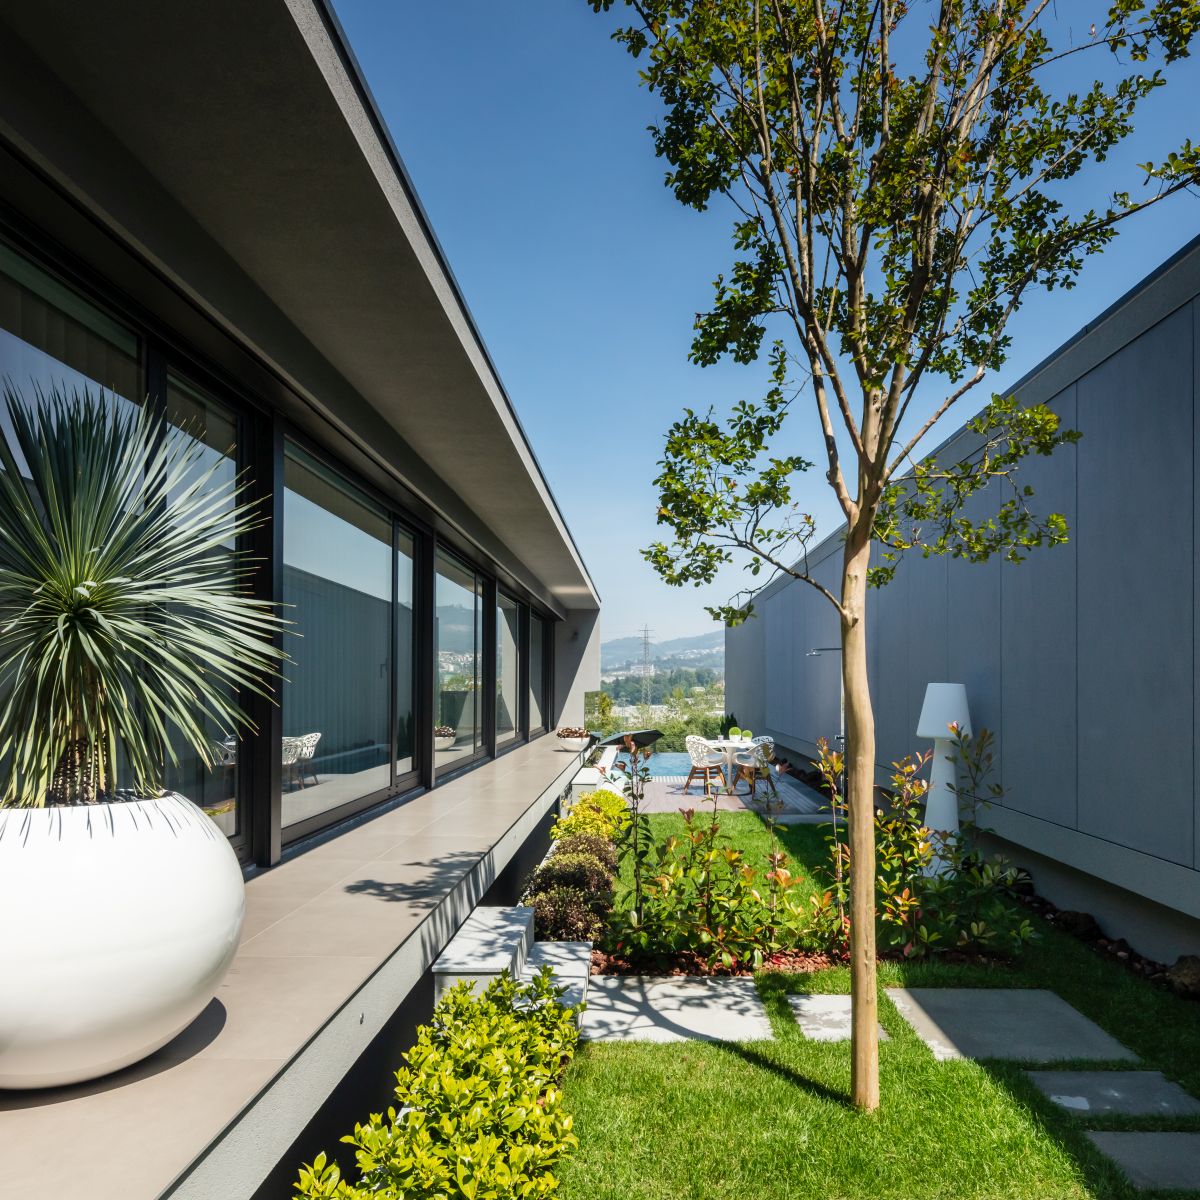 Although small, the courtyards between the houses ensure a close connection between nature and architecture